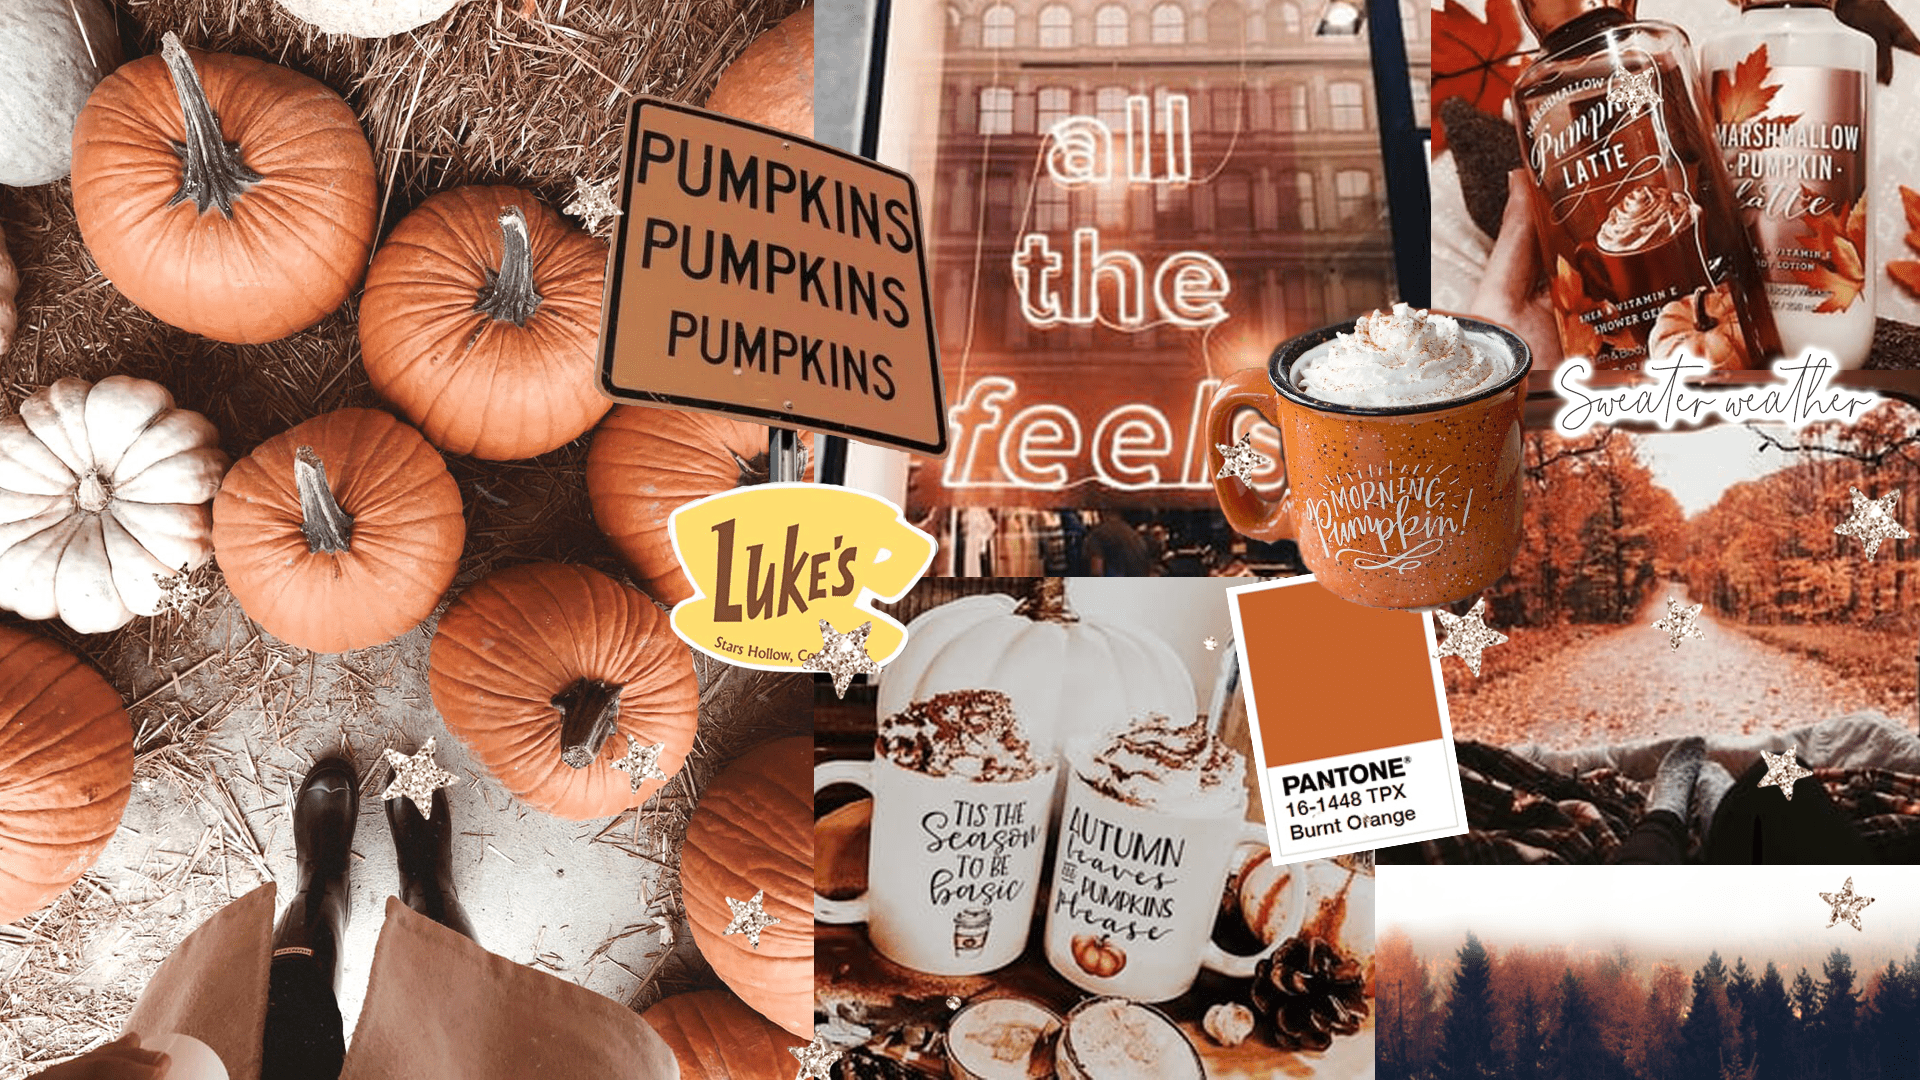 A collage of pumpkin spice latte cups, orange and brown leaves, and a sign that says 